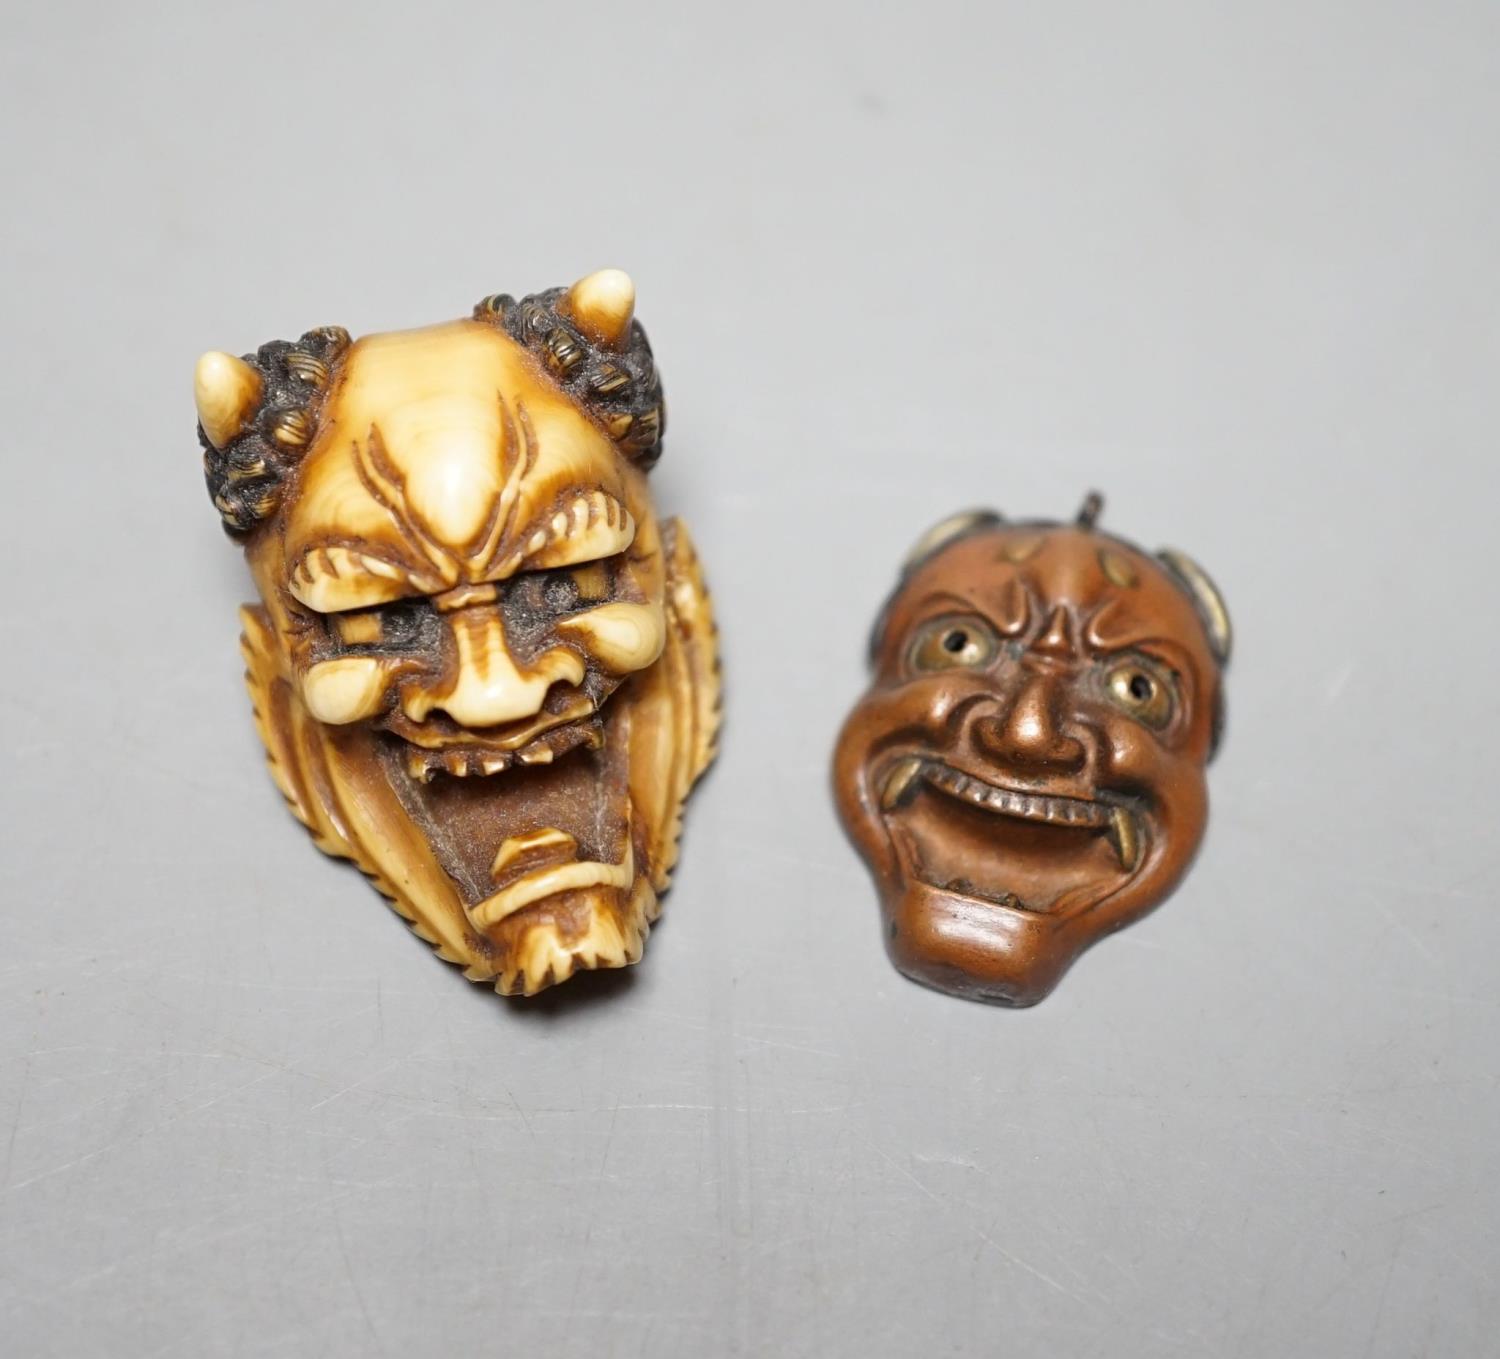 An unusual Japanese mixed metal noh mask containing minute bone dice and a stag antler noh mask